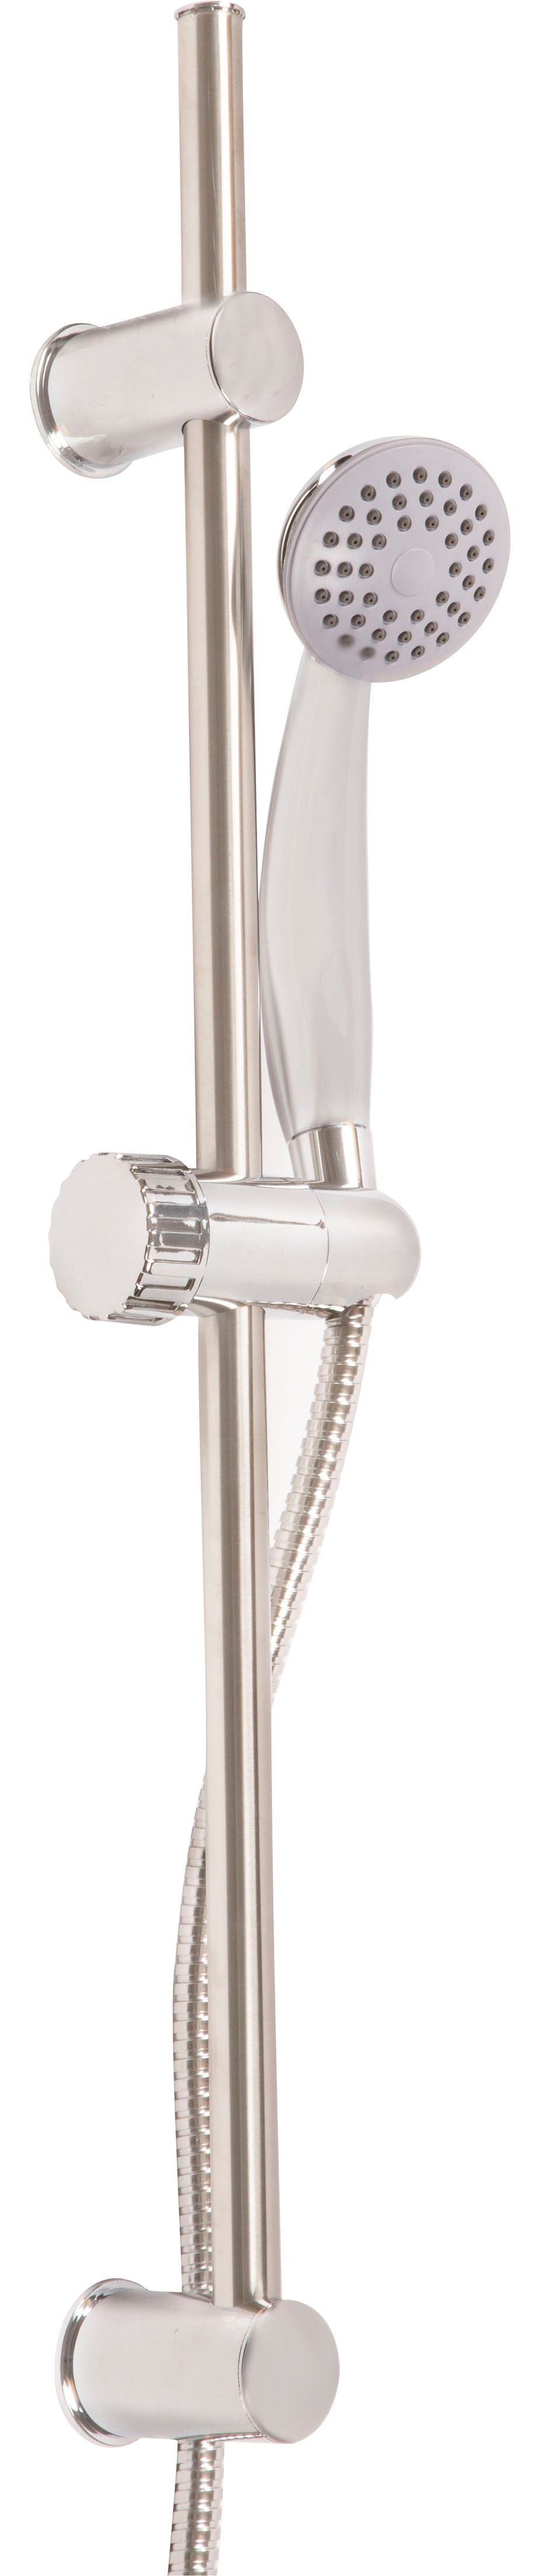 Wickes 1 Function Shower Set - Chrome